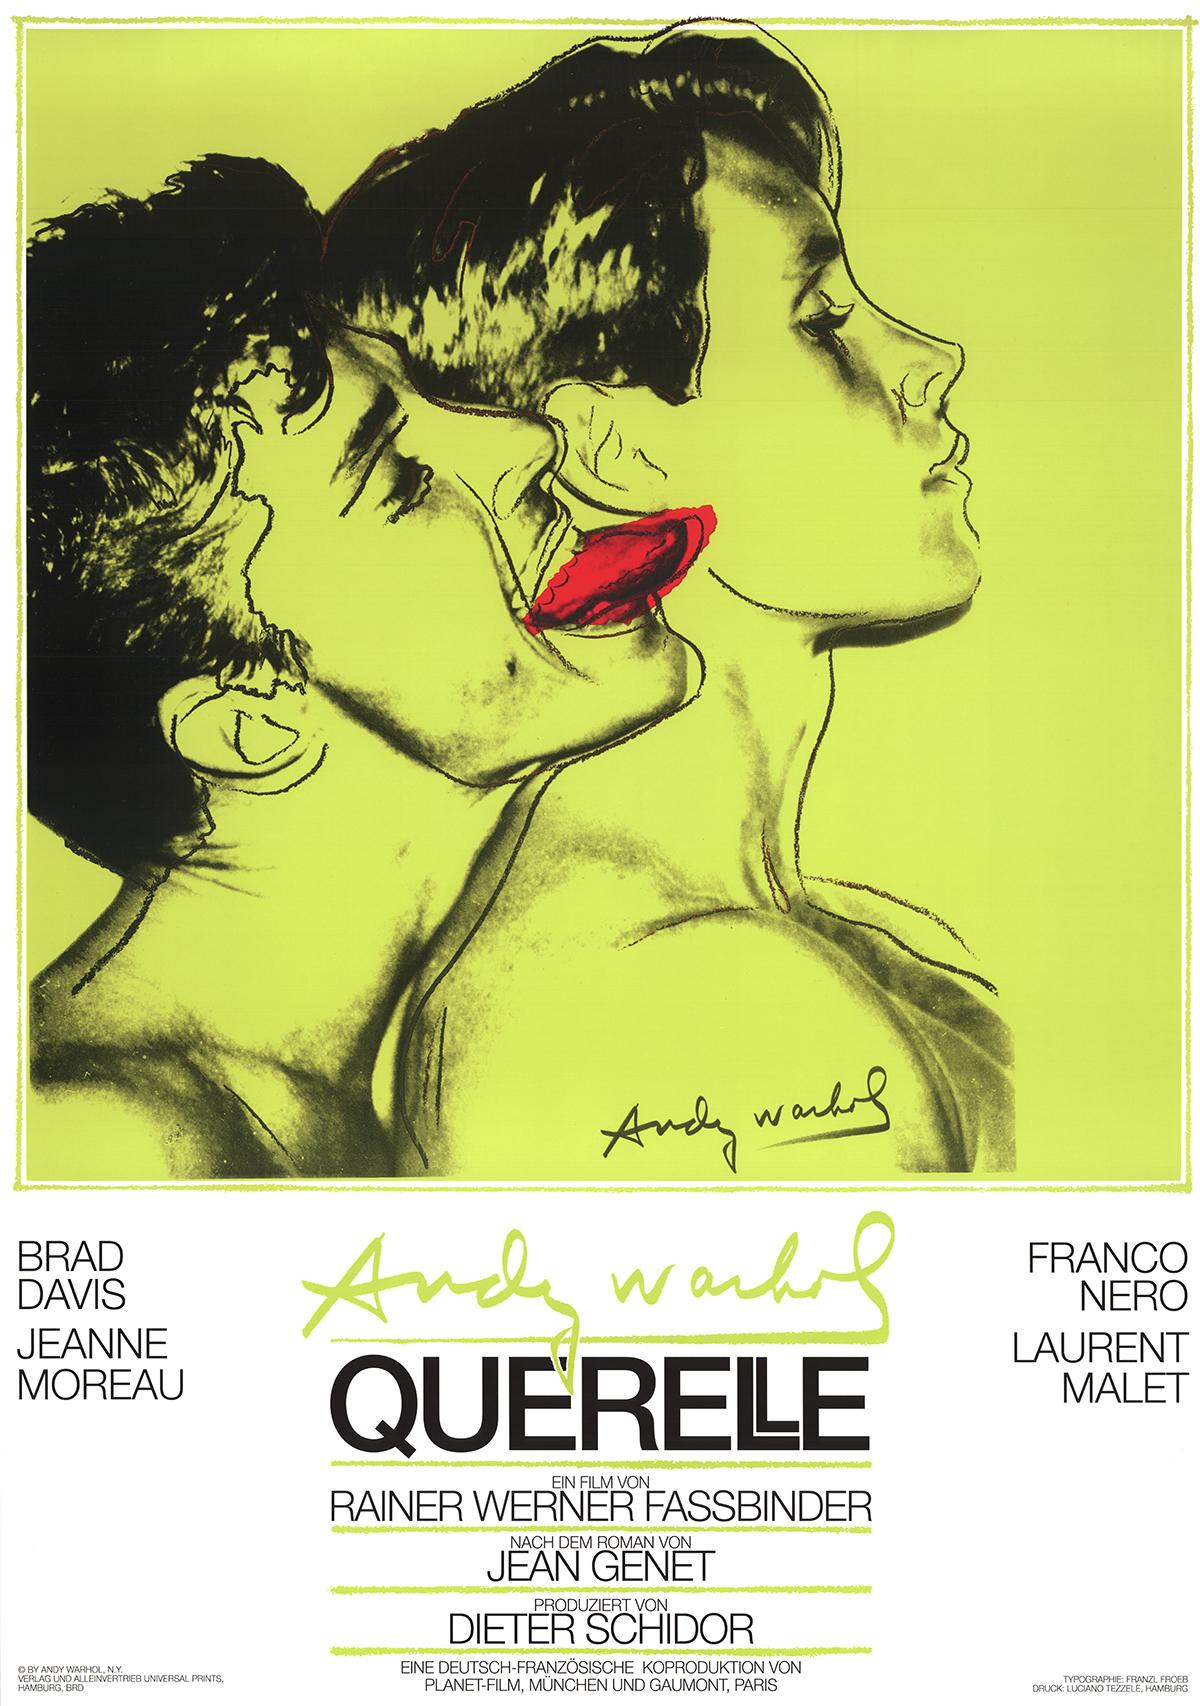 Andy Warhol-Querelle Green-FIRST EDITION - Print by (after) Andy Warhol